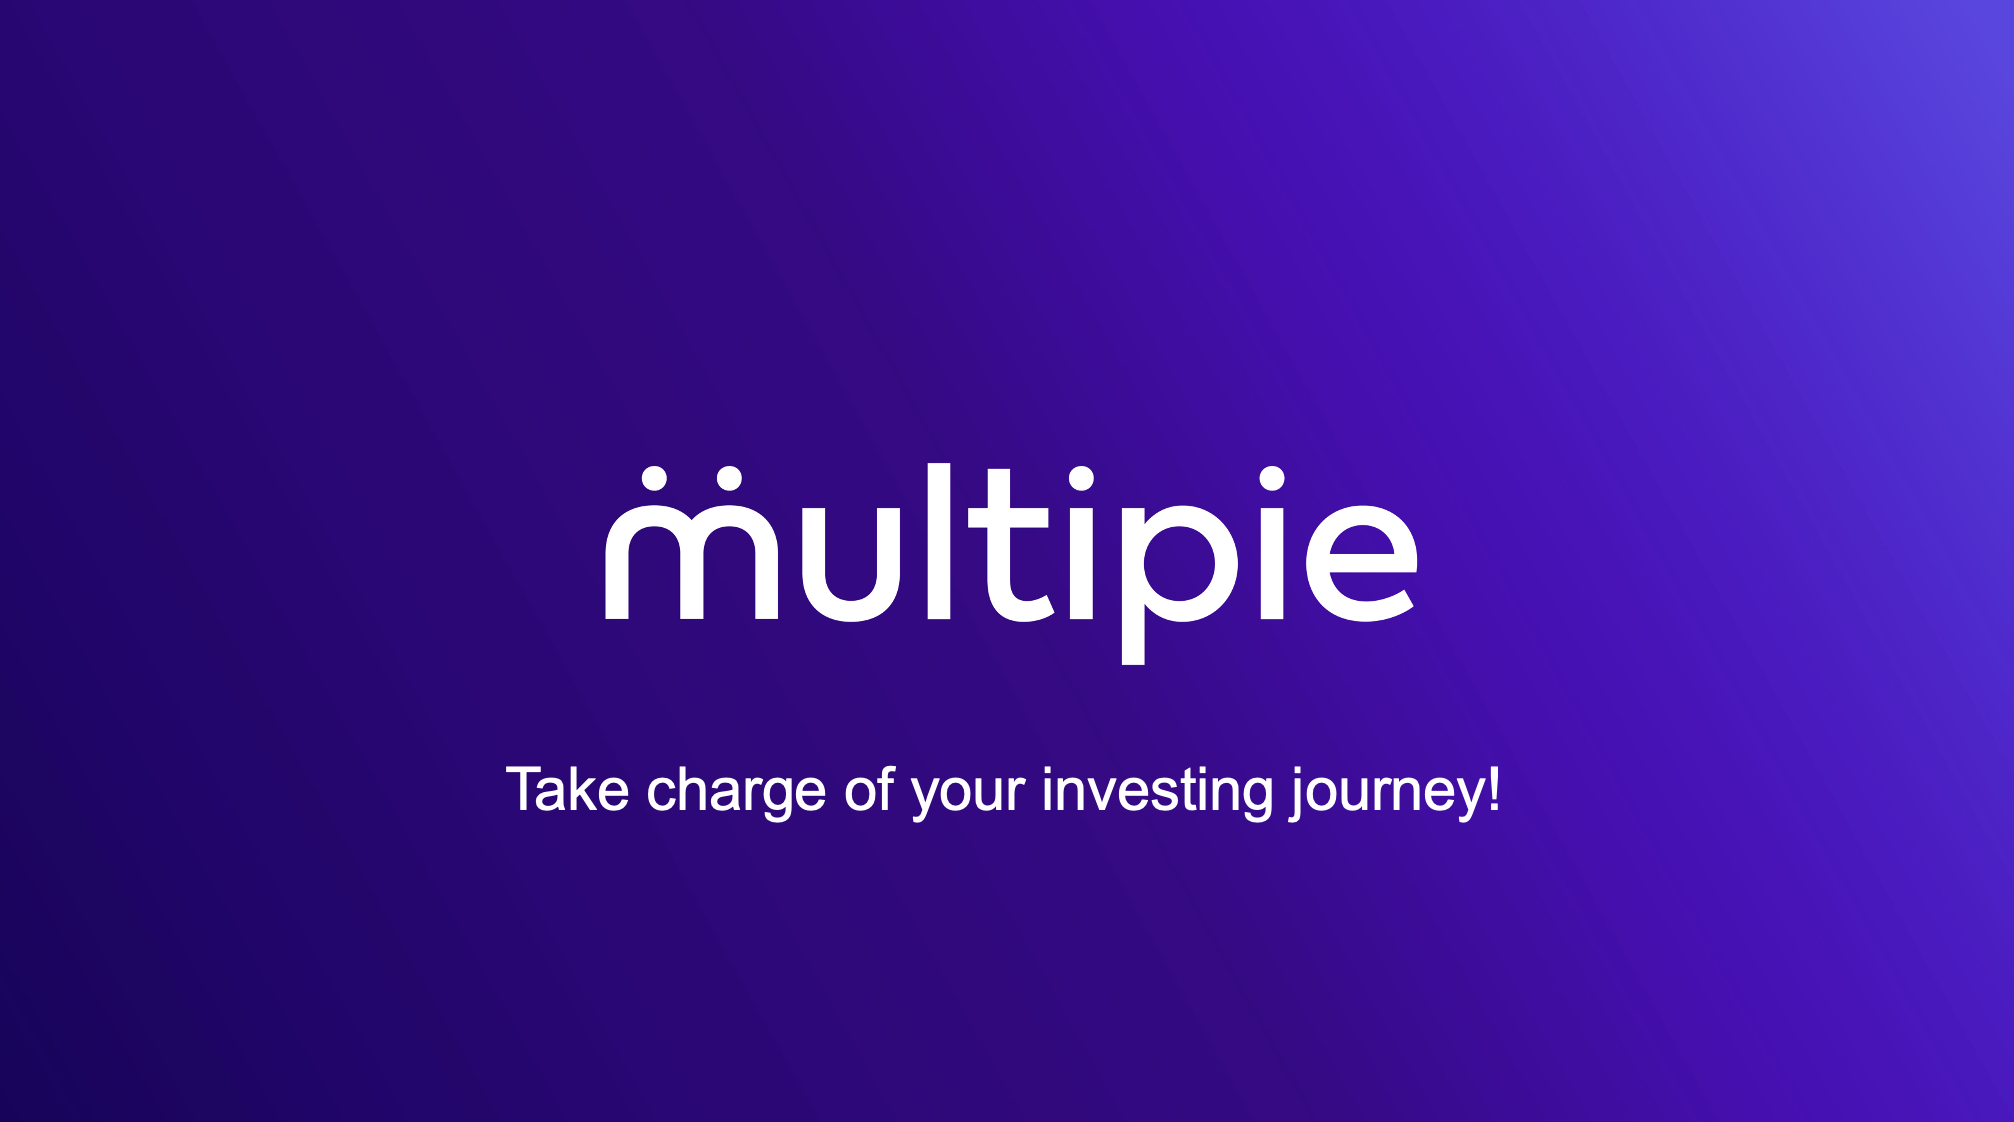 Take charge of your investing journey